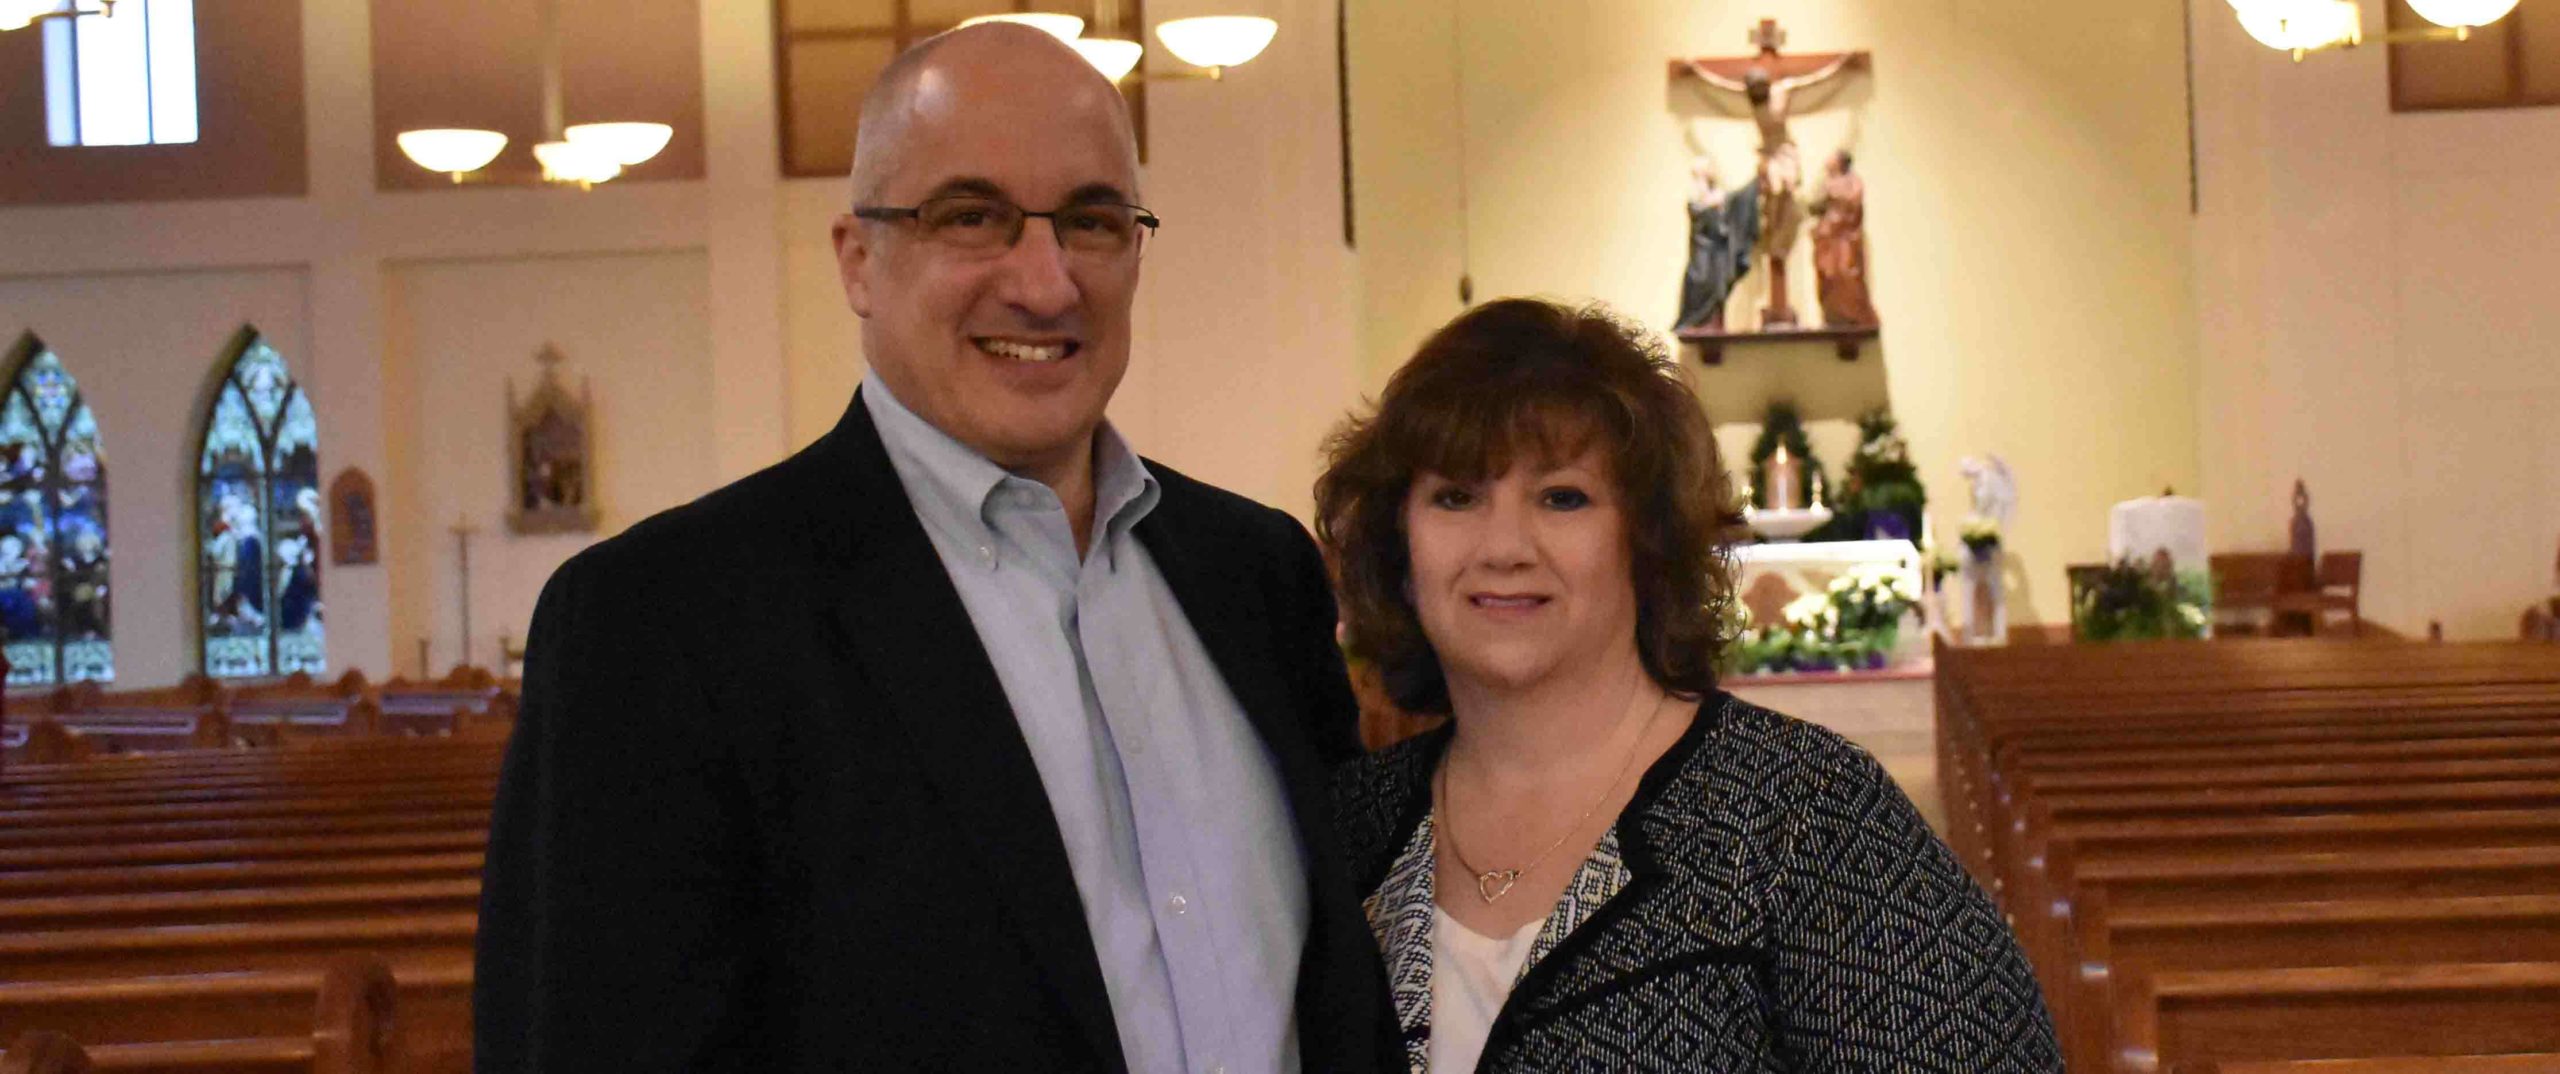 Retrouvaille deepens faith, heals marriage of St. John Westminster parishioner